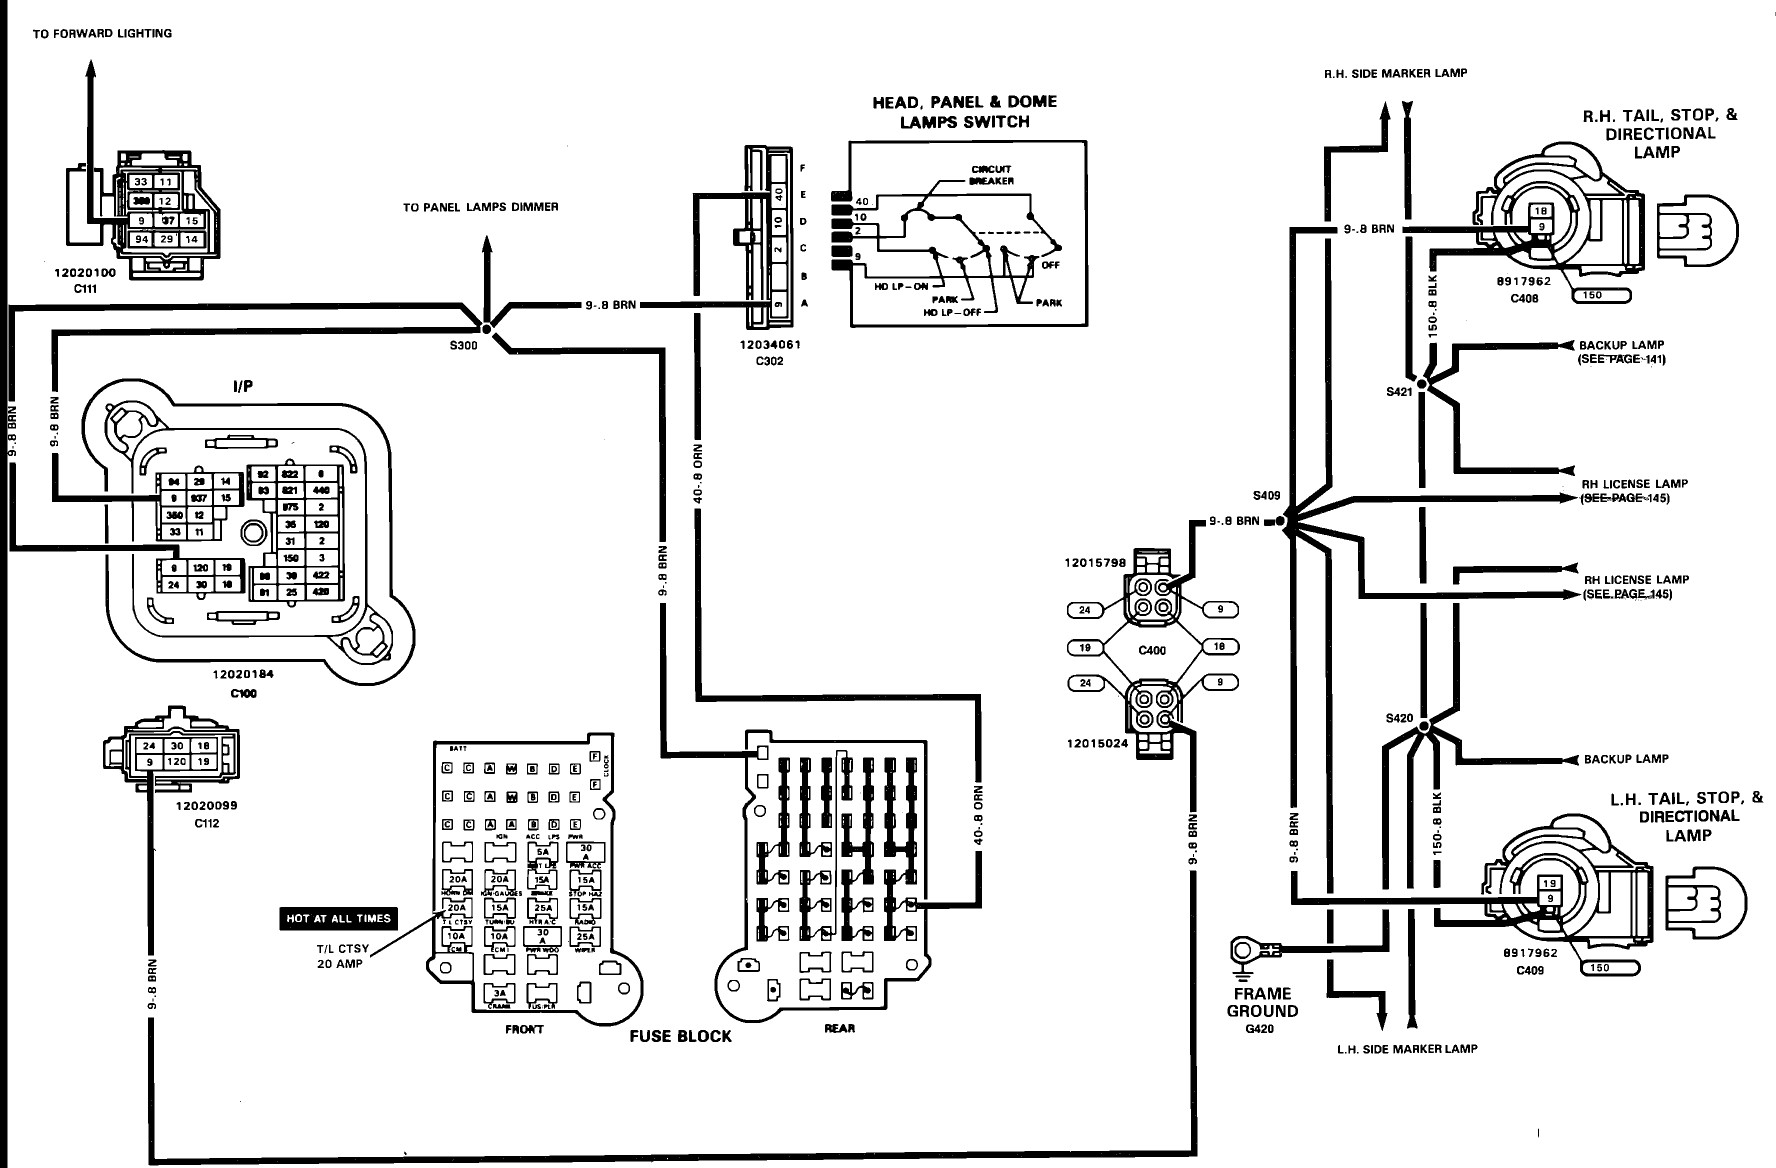 Wiring Diagram for 2001 Chevy S10 4.3 Engine Diagram] 2003 S10 Tail Light Wiring Diagram Full Version Hd